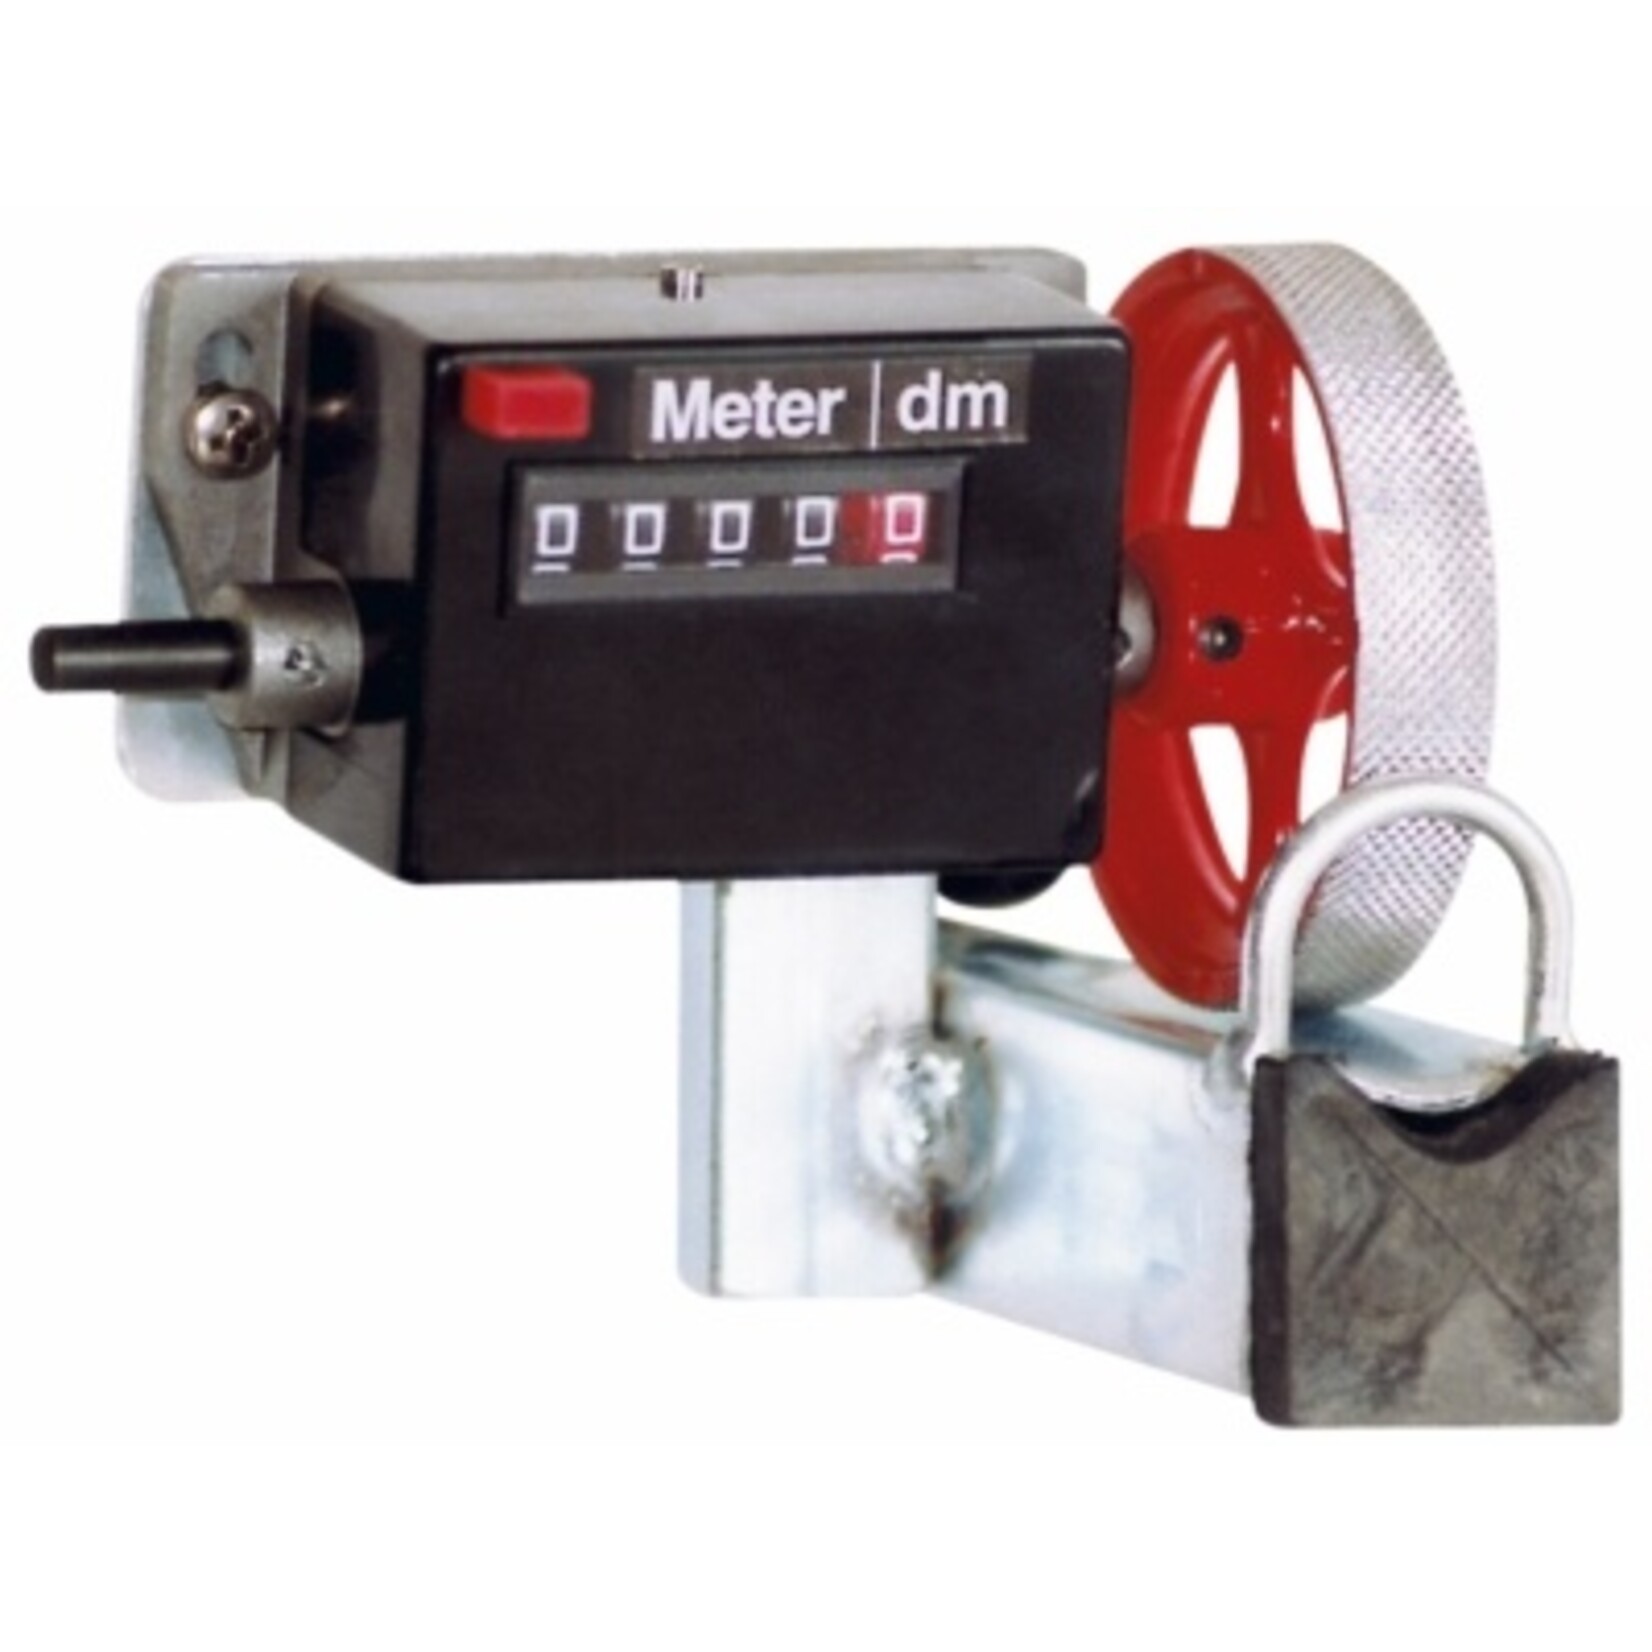 Plastimo Metric counter for ropes